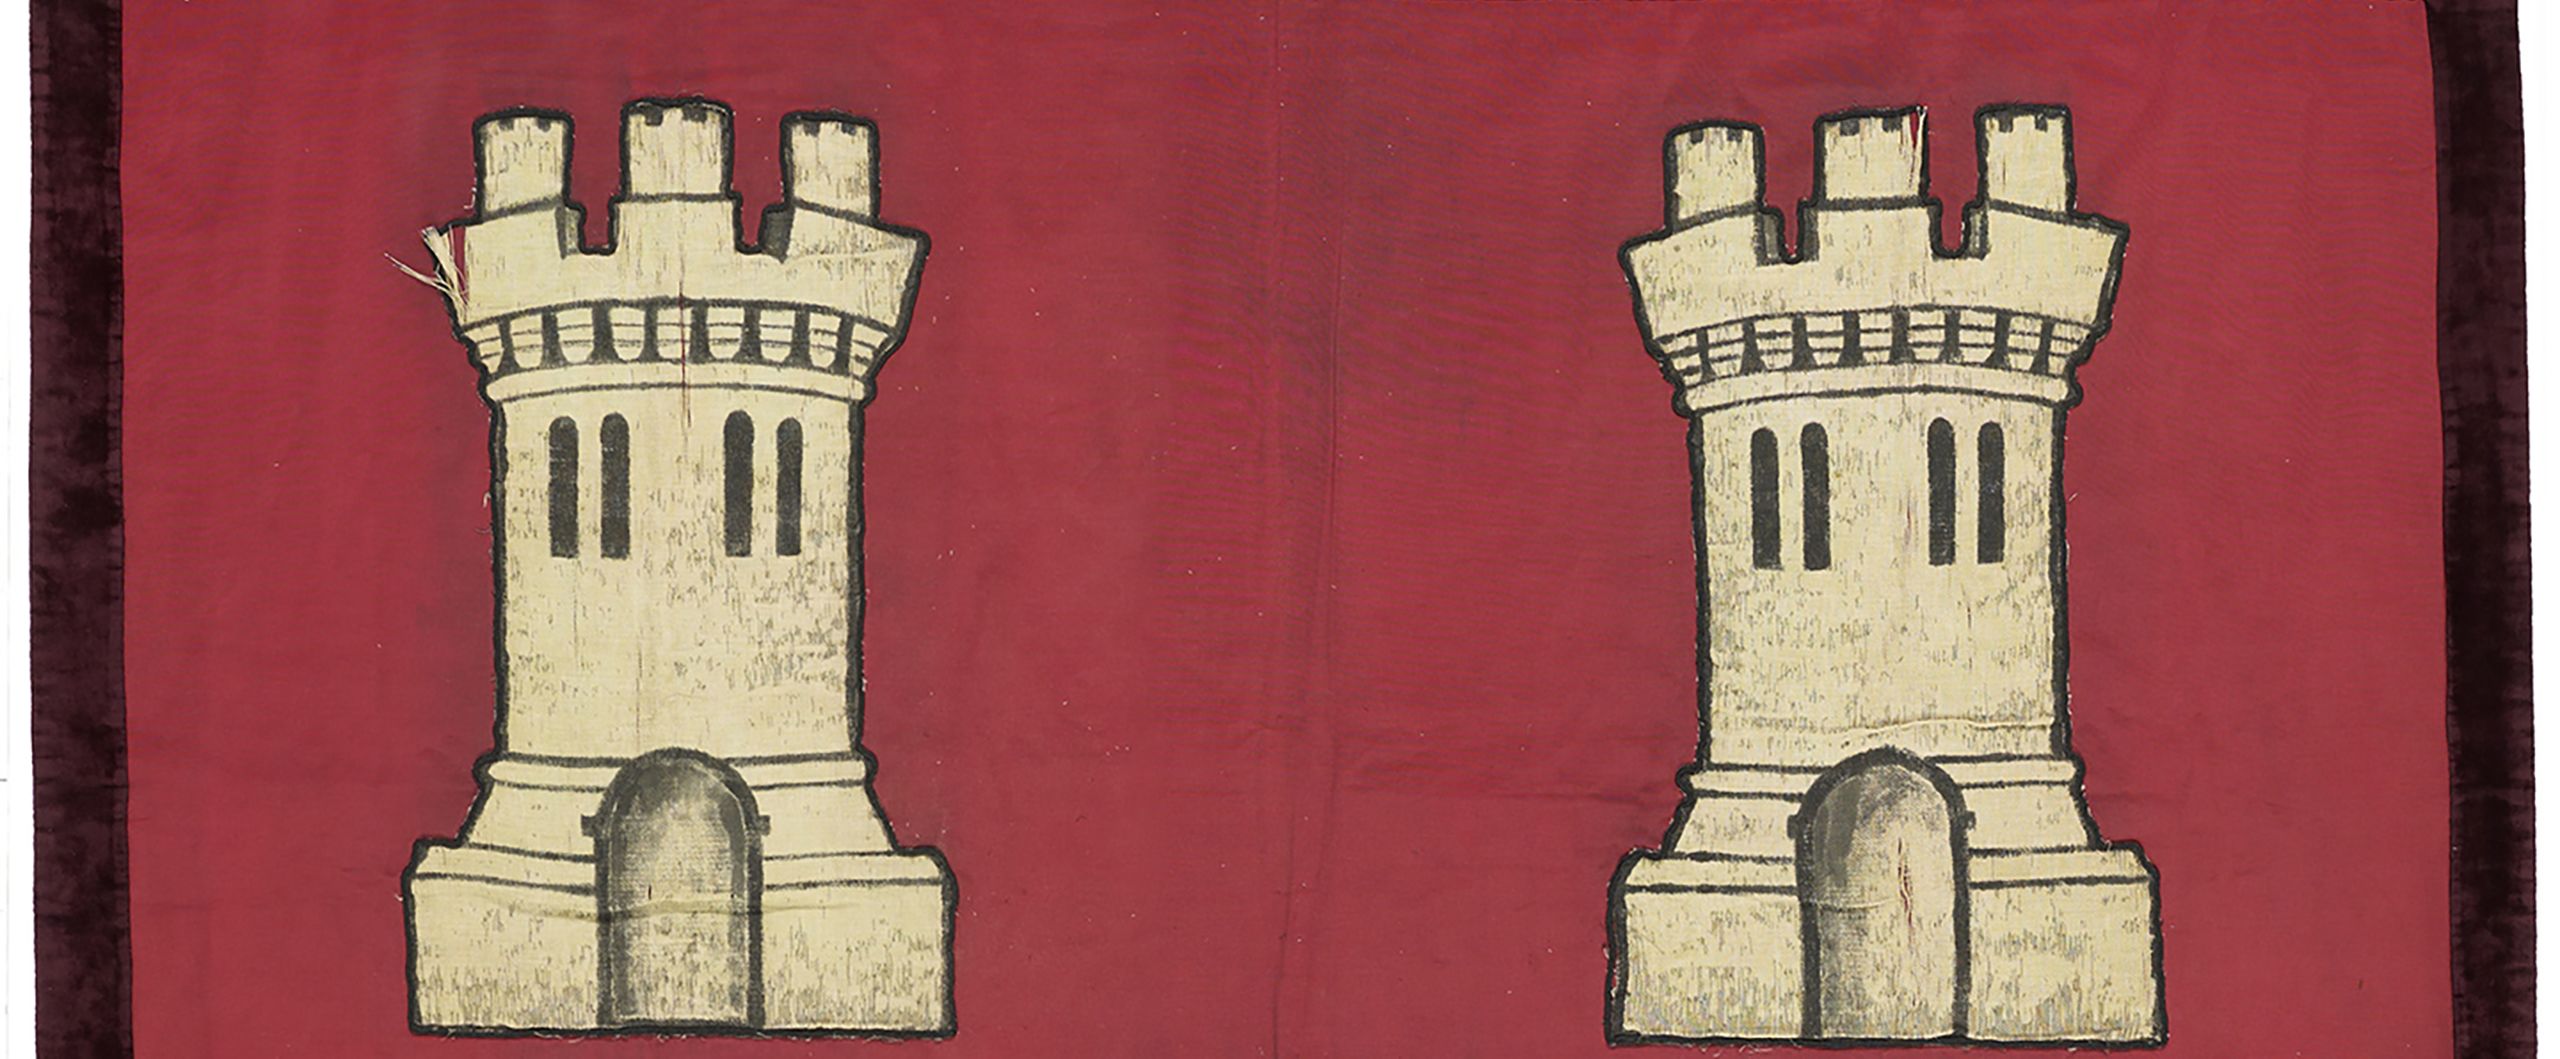 Section taken from Ethel Williams' suffragist marching banner, with a rich red background and two castle turrets on either side of the image